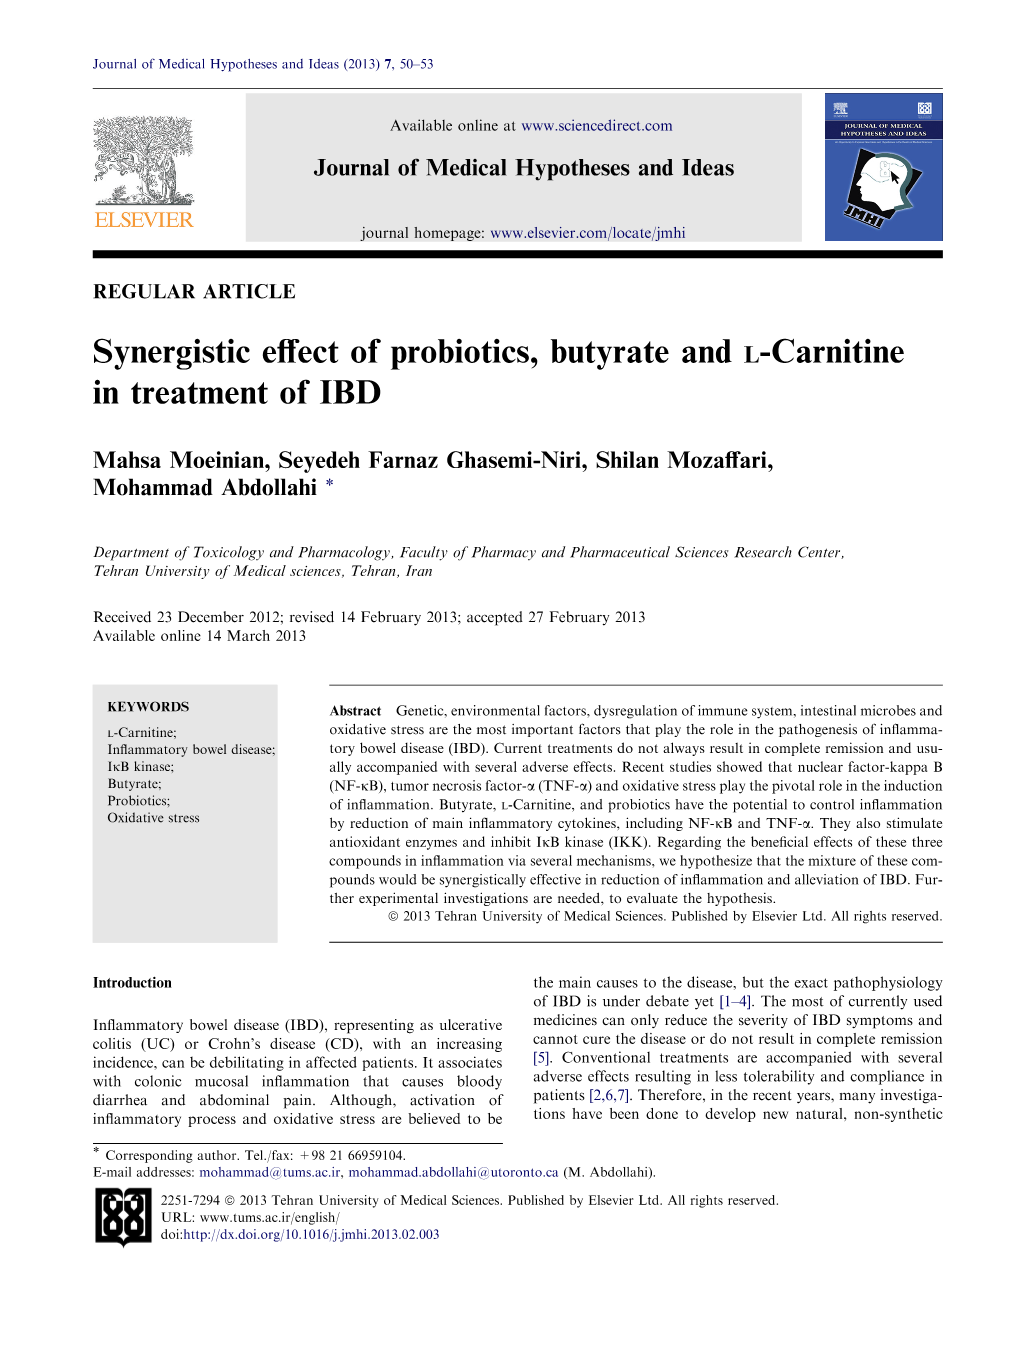 Synergistic Effect of Probiotics, Butyrate and L